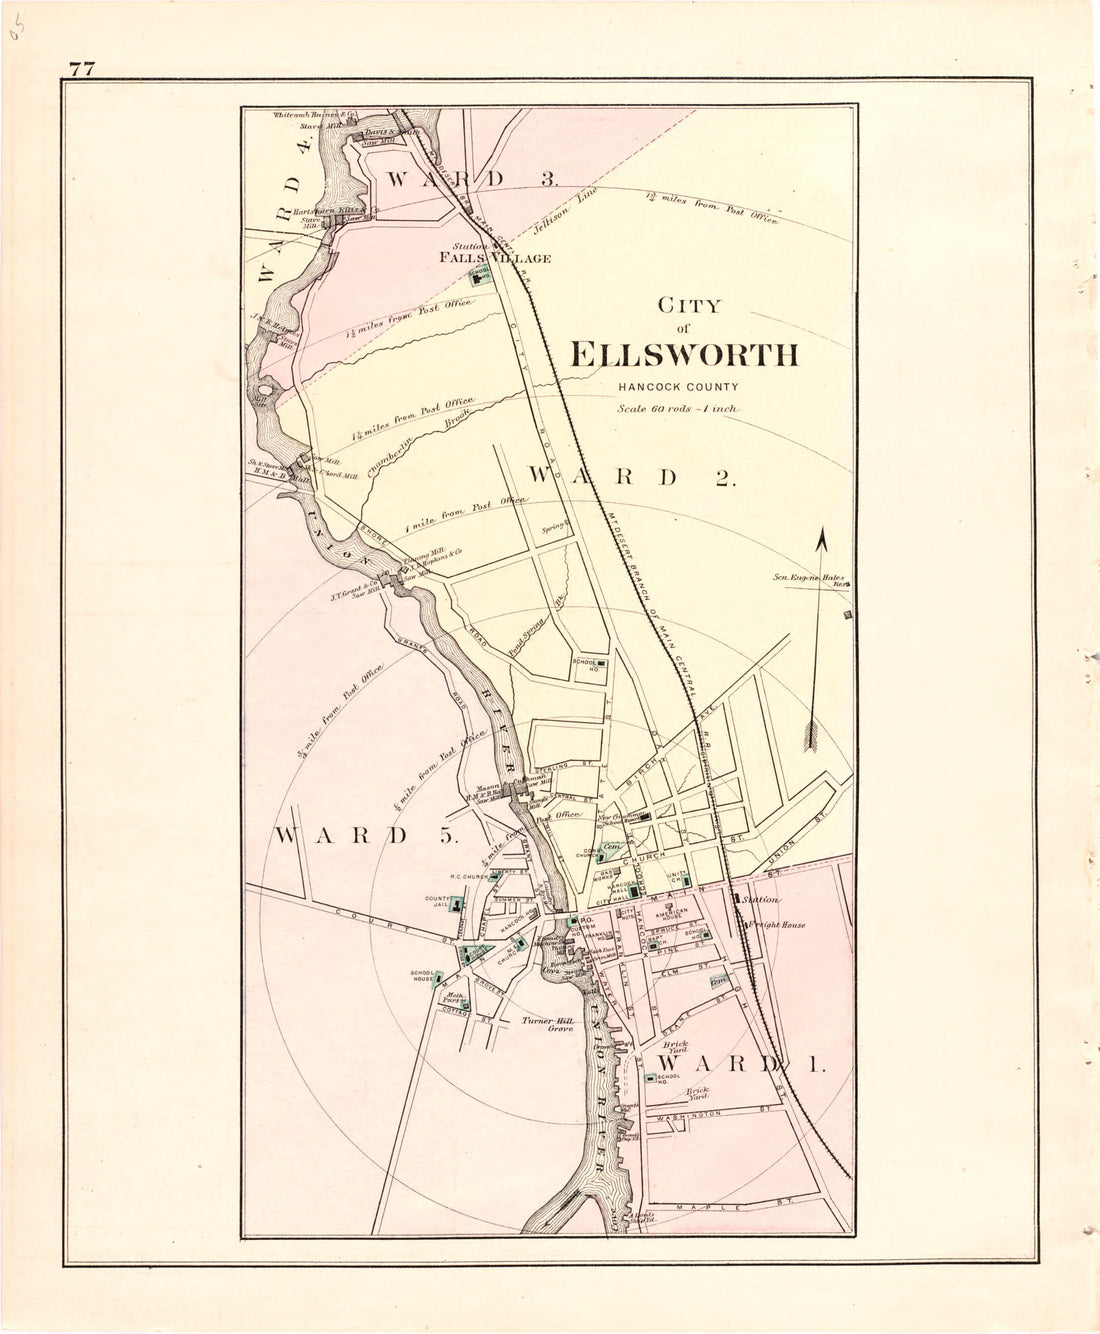 This hand drawn illustration (map) of City of Ellsworth from Colby&